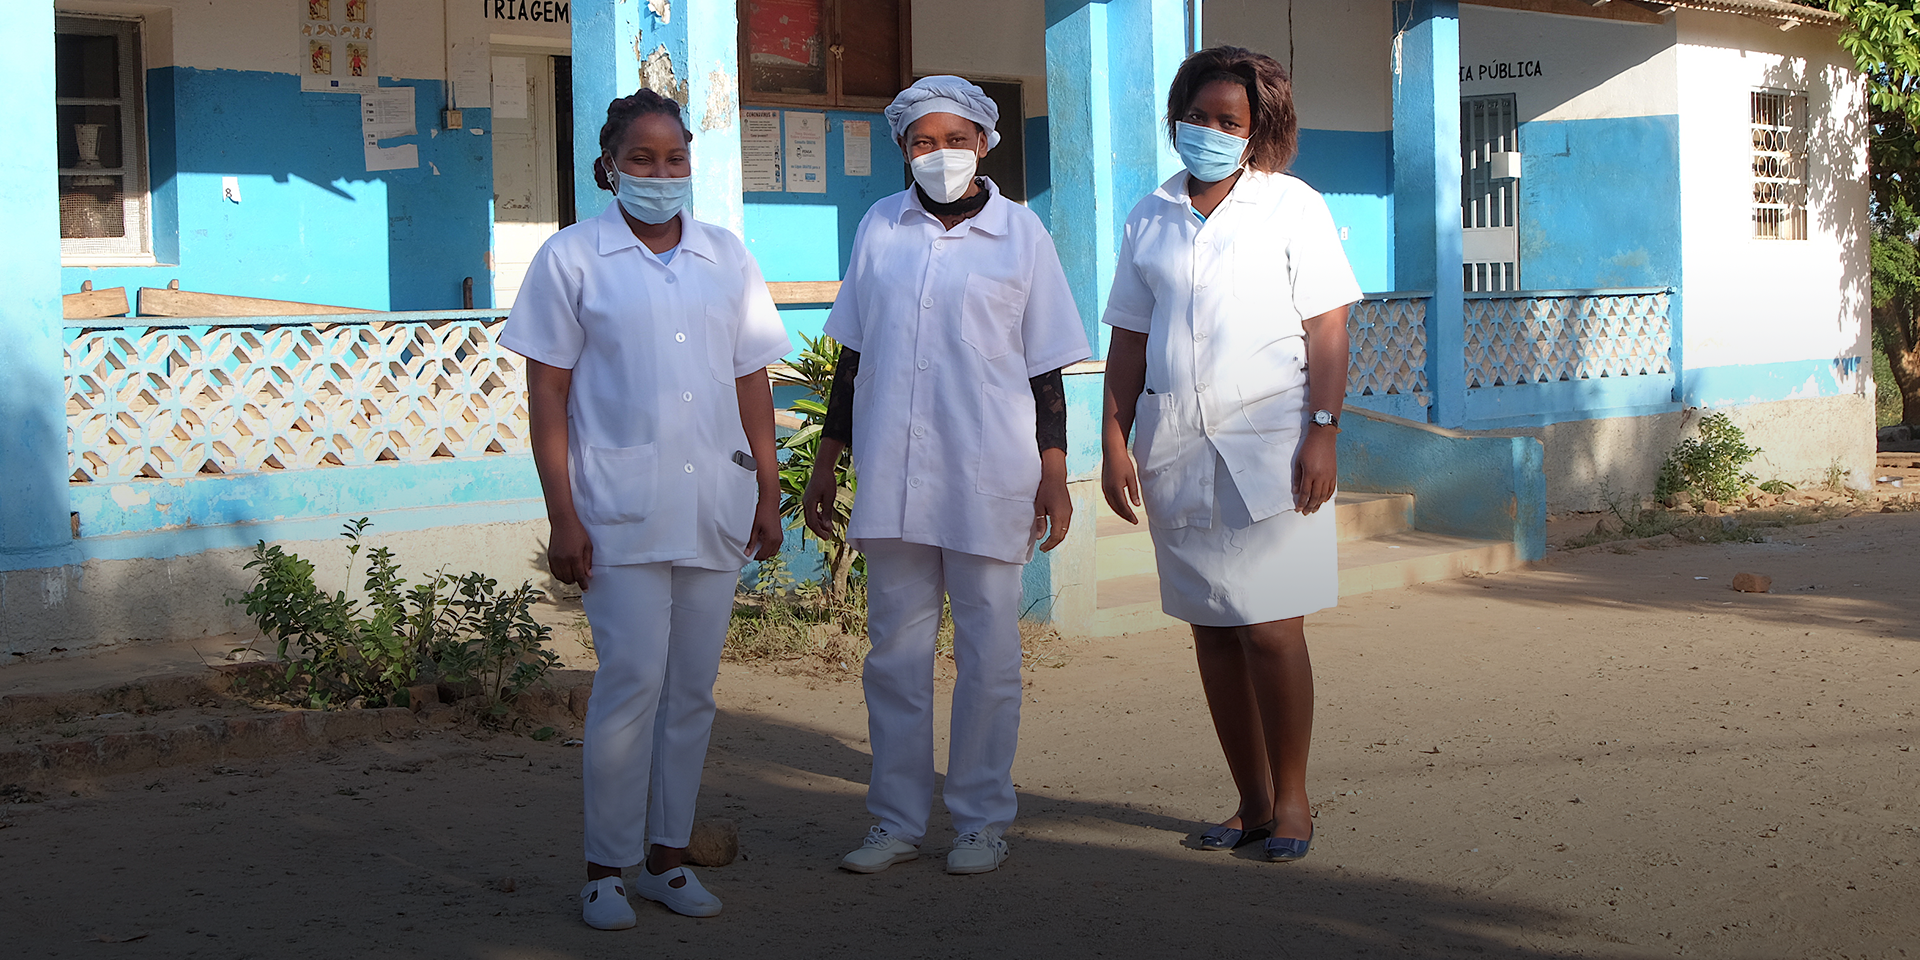 Three midwives stand outside a healthcare clinic in Mozambique.